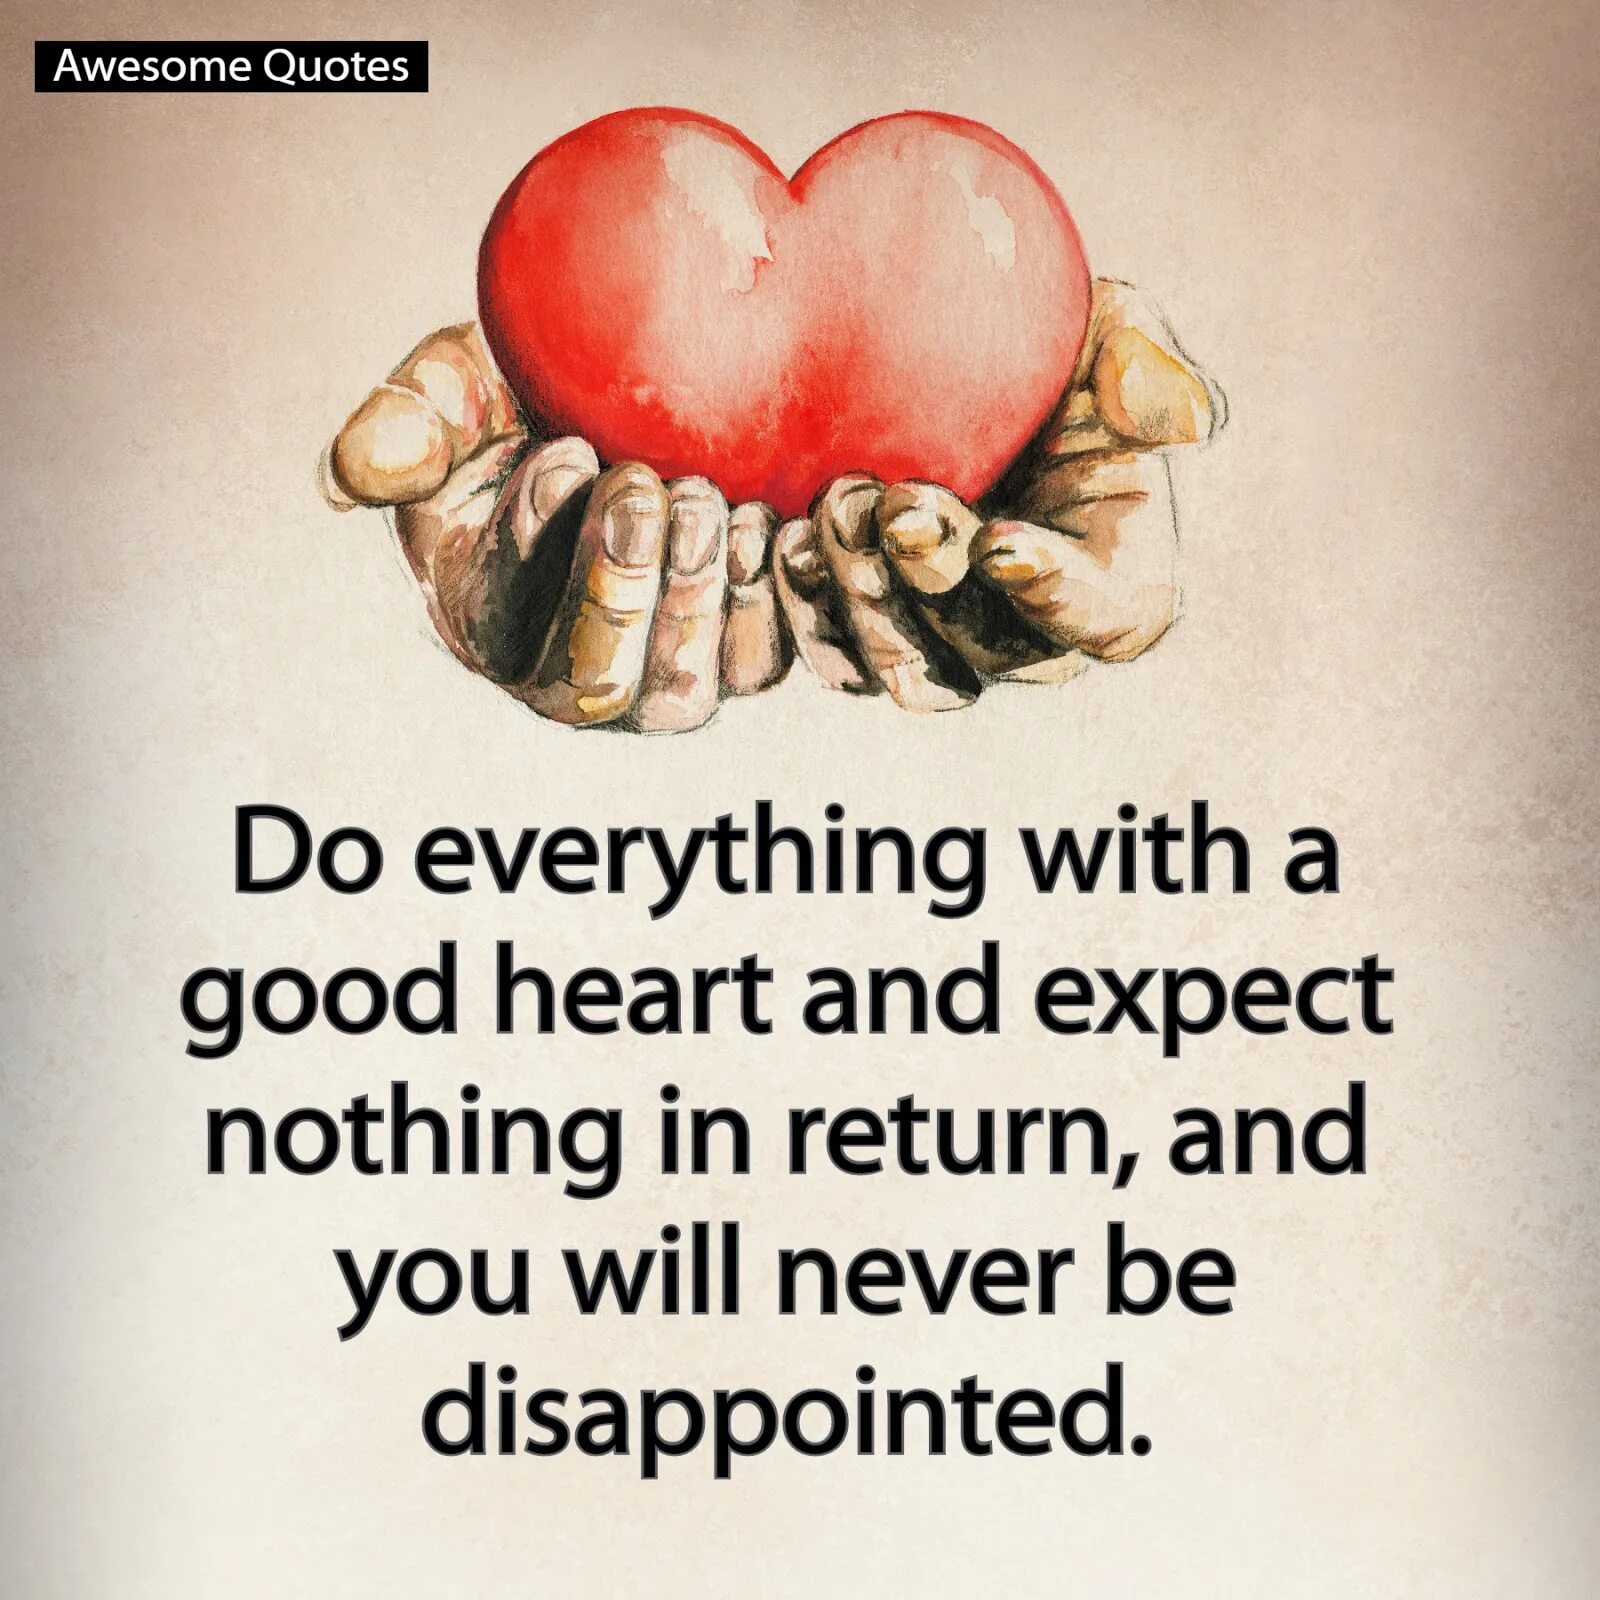 Words of your heart. Good Heart. Out of the goodness of your Heart. Expect nothing and you will never be disappointed. Expect nothing картинки.